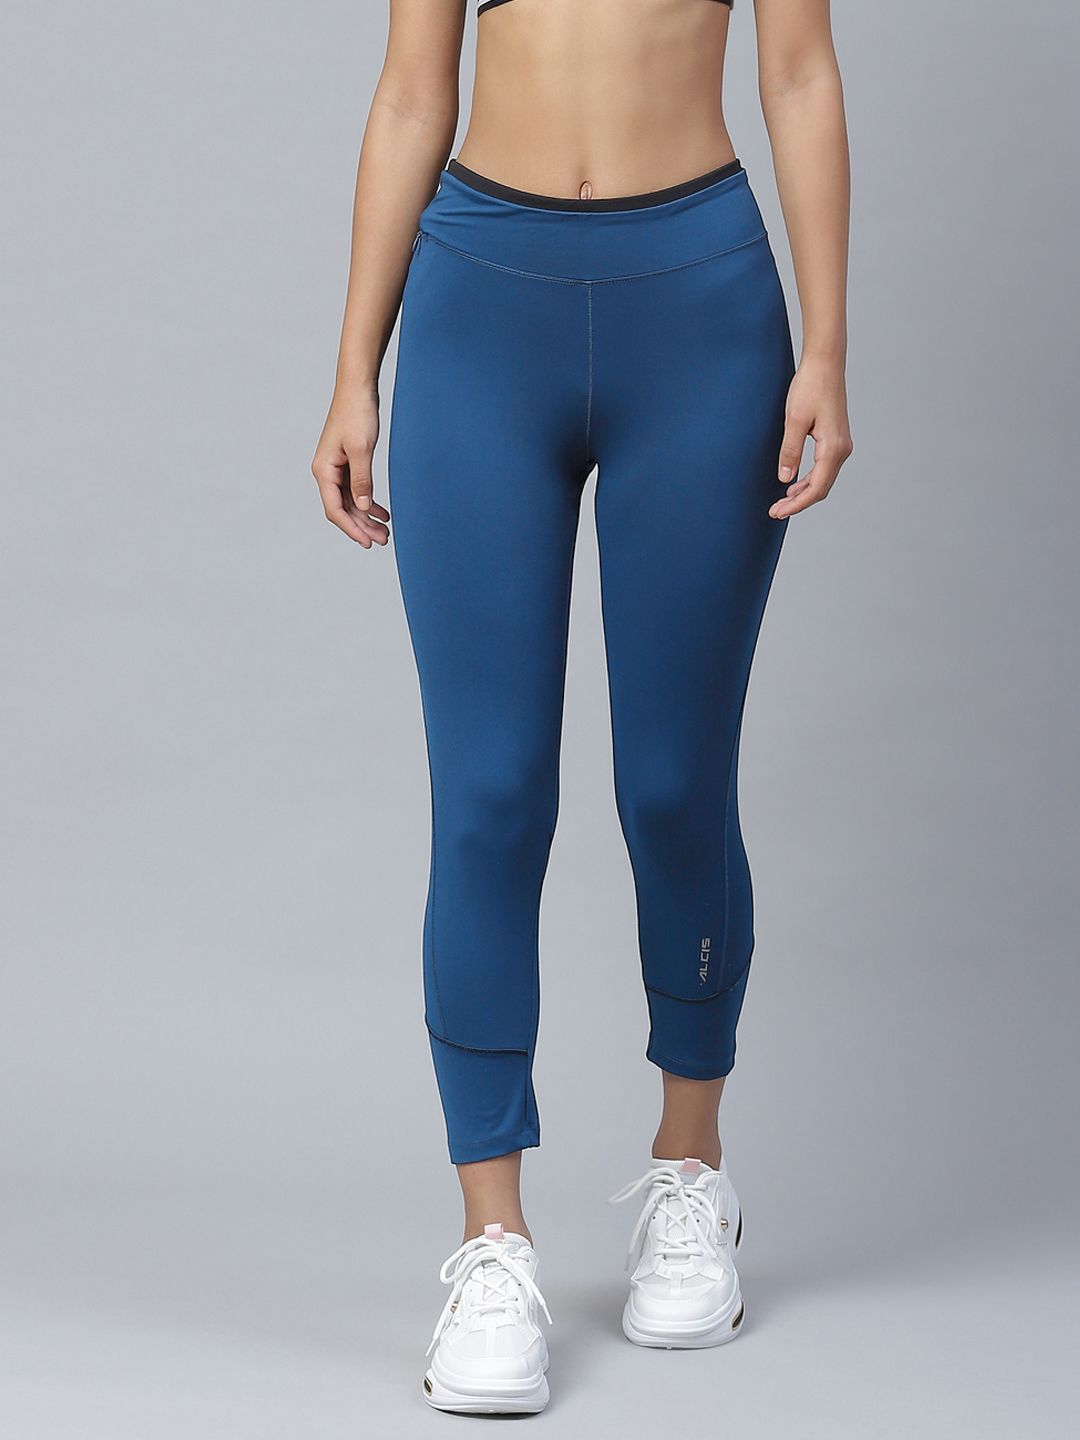 Alcis Women Teal Blue Solid Knitted Running Tights Price in India